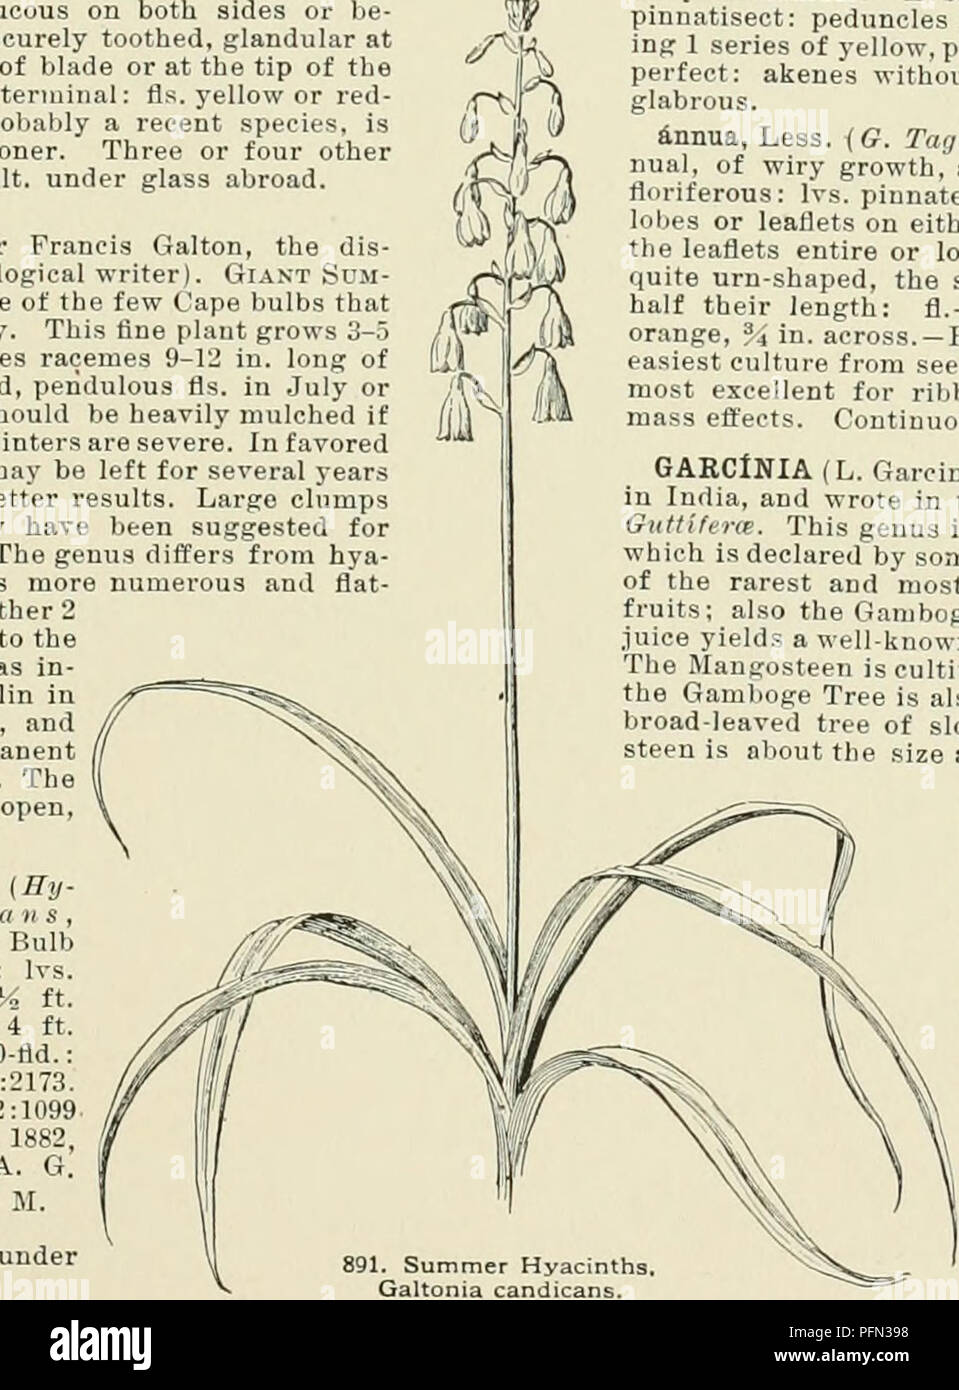 . Cyclopedia of American horticulture, comprising suggestions for cultivation of horticultural plants, descriptions of the species of fruits, vegetables, flowers, and ornamental plants sold in the United States and Canada, together with geographical and biographical sketches. Gardening. mpnsite for GAM6LEPIS (Greek for uiiiled scales; referring to the involucre). Comp6sita. About a dozen S. African herbs or small shrubs, somewhat allied botanically to Chrysanthemum. Lvs. alternate and mostly pinnatisect: peduncles 1-headed, the heads bear- ing 1 series of yellow, pistillate rays, the disk fls. Stock Photo